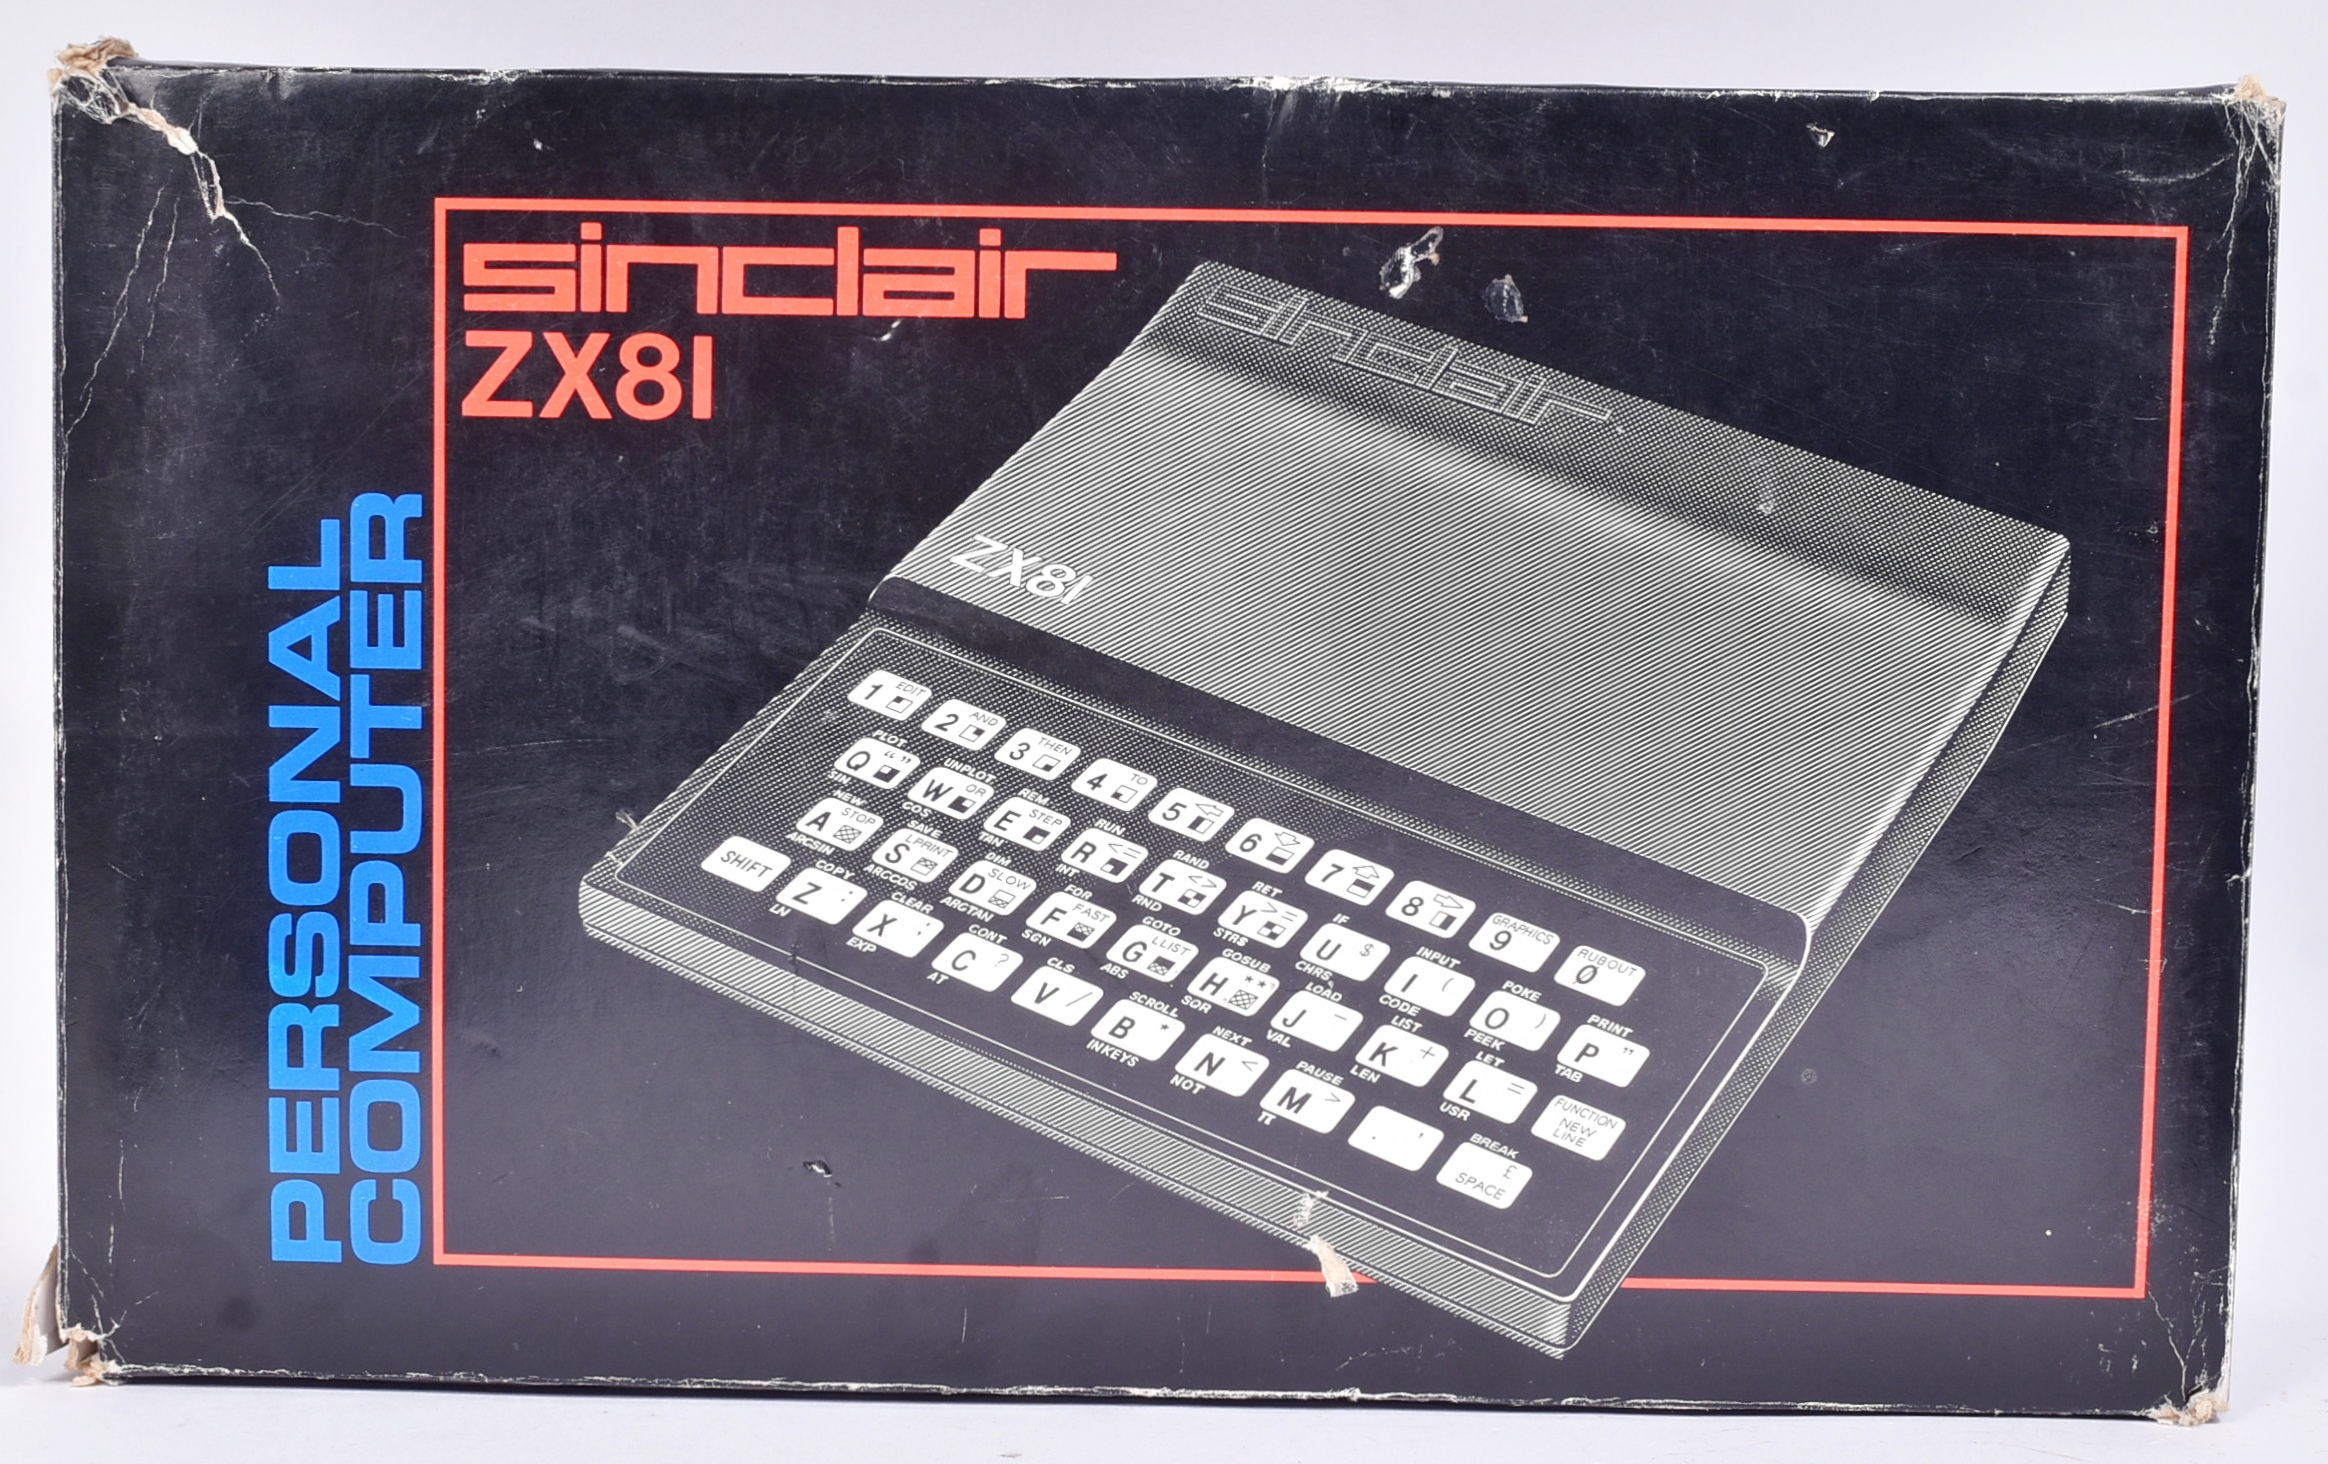 RETRO GAMING - VINTAGE SINCLAIR ZX81 PERSONAL COMPUTER - Image 6 of 6